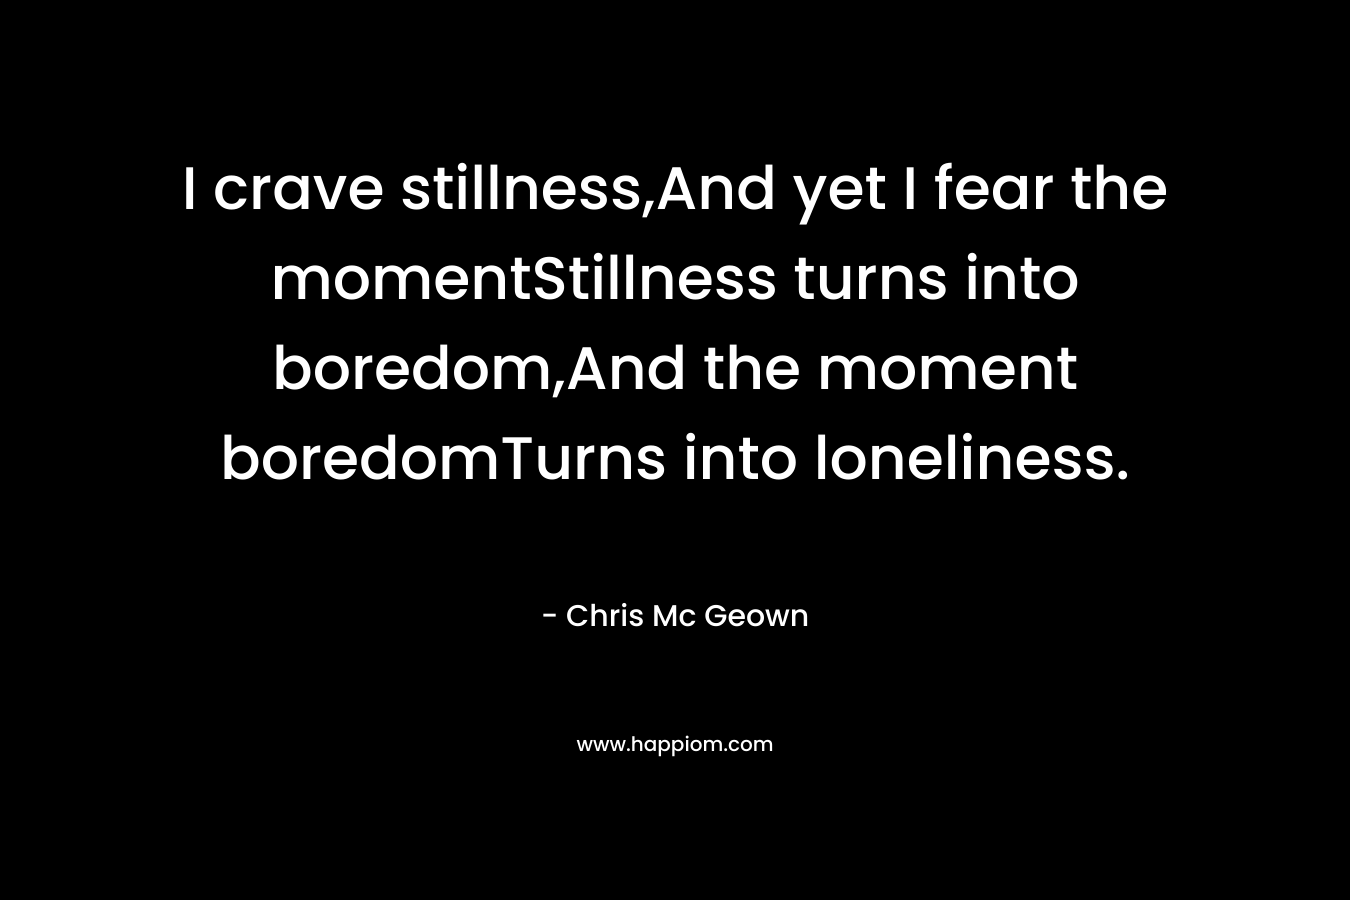 I crave stillness,And yet I fear the momentStillness turns into boredom,And the moment boredomTurns into loneliness.